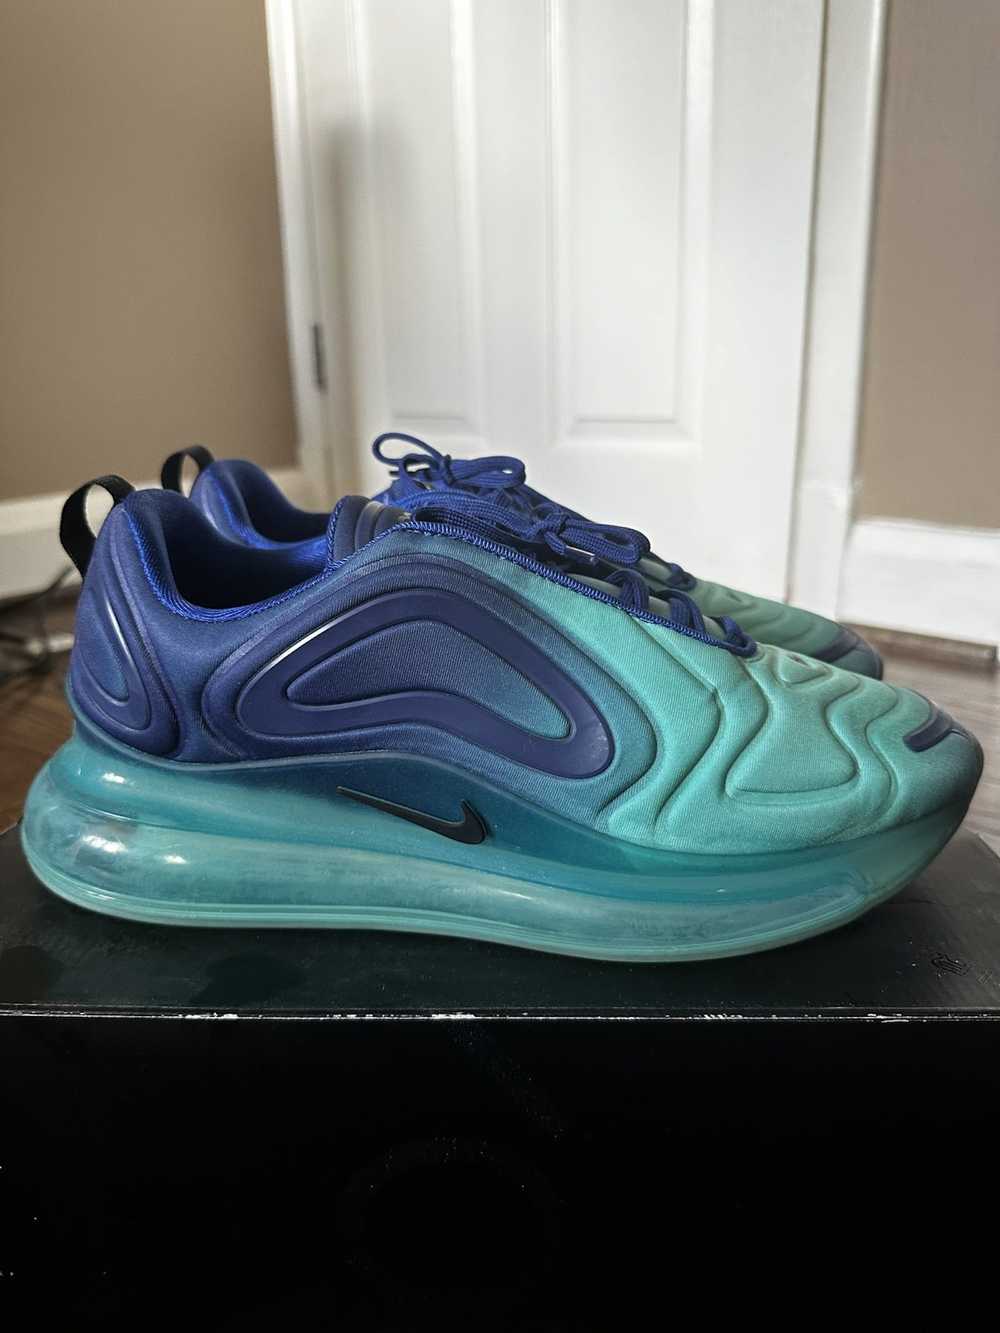 Nike Air Max 720 Sea Forest - image 1